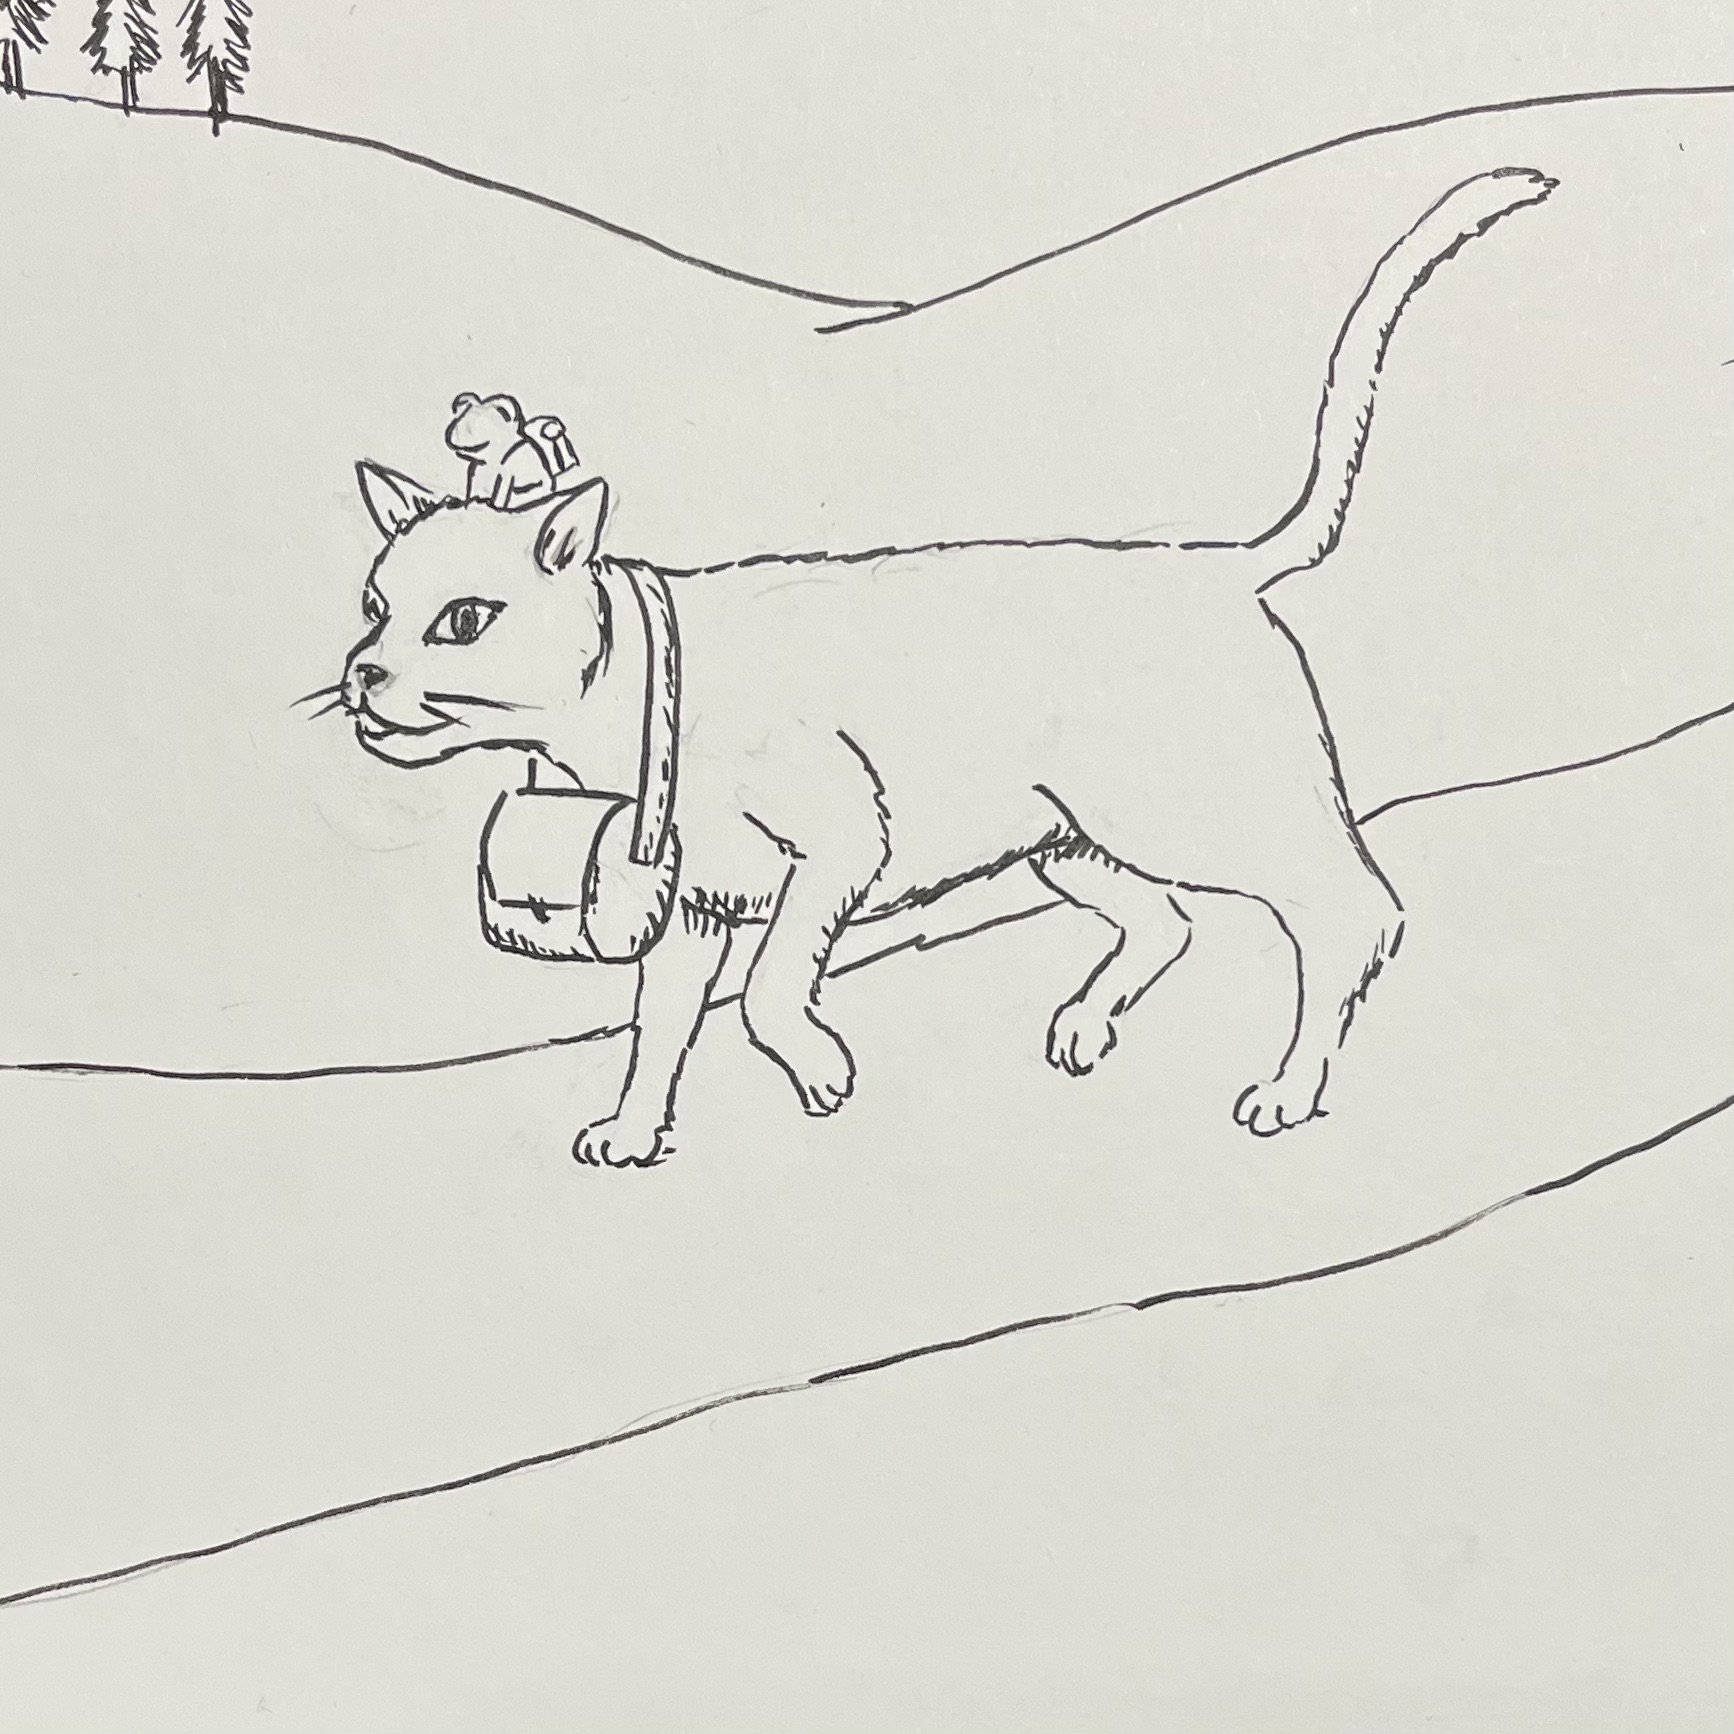 An ink drawing of a cat walking down a road with a small pouch around its neck. On the cat's head rides his friend toad. The toad is wearing a backpack.